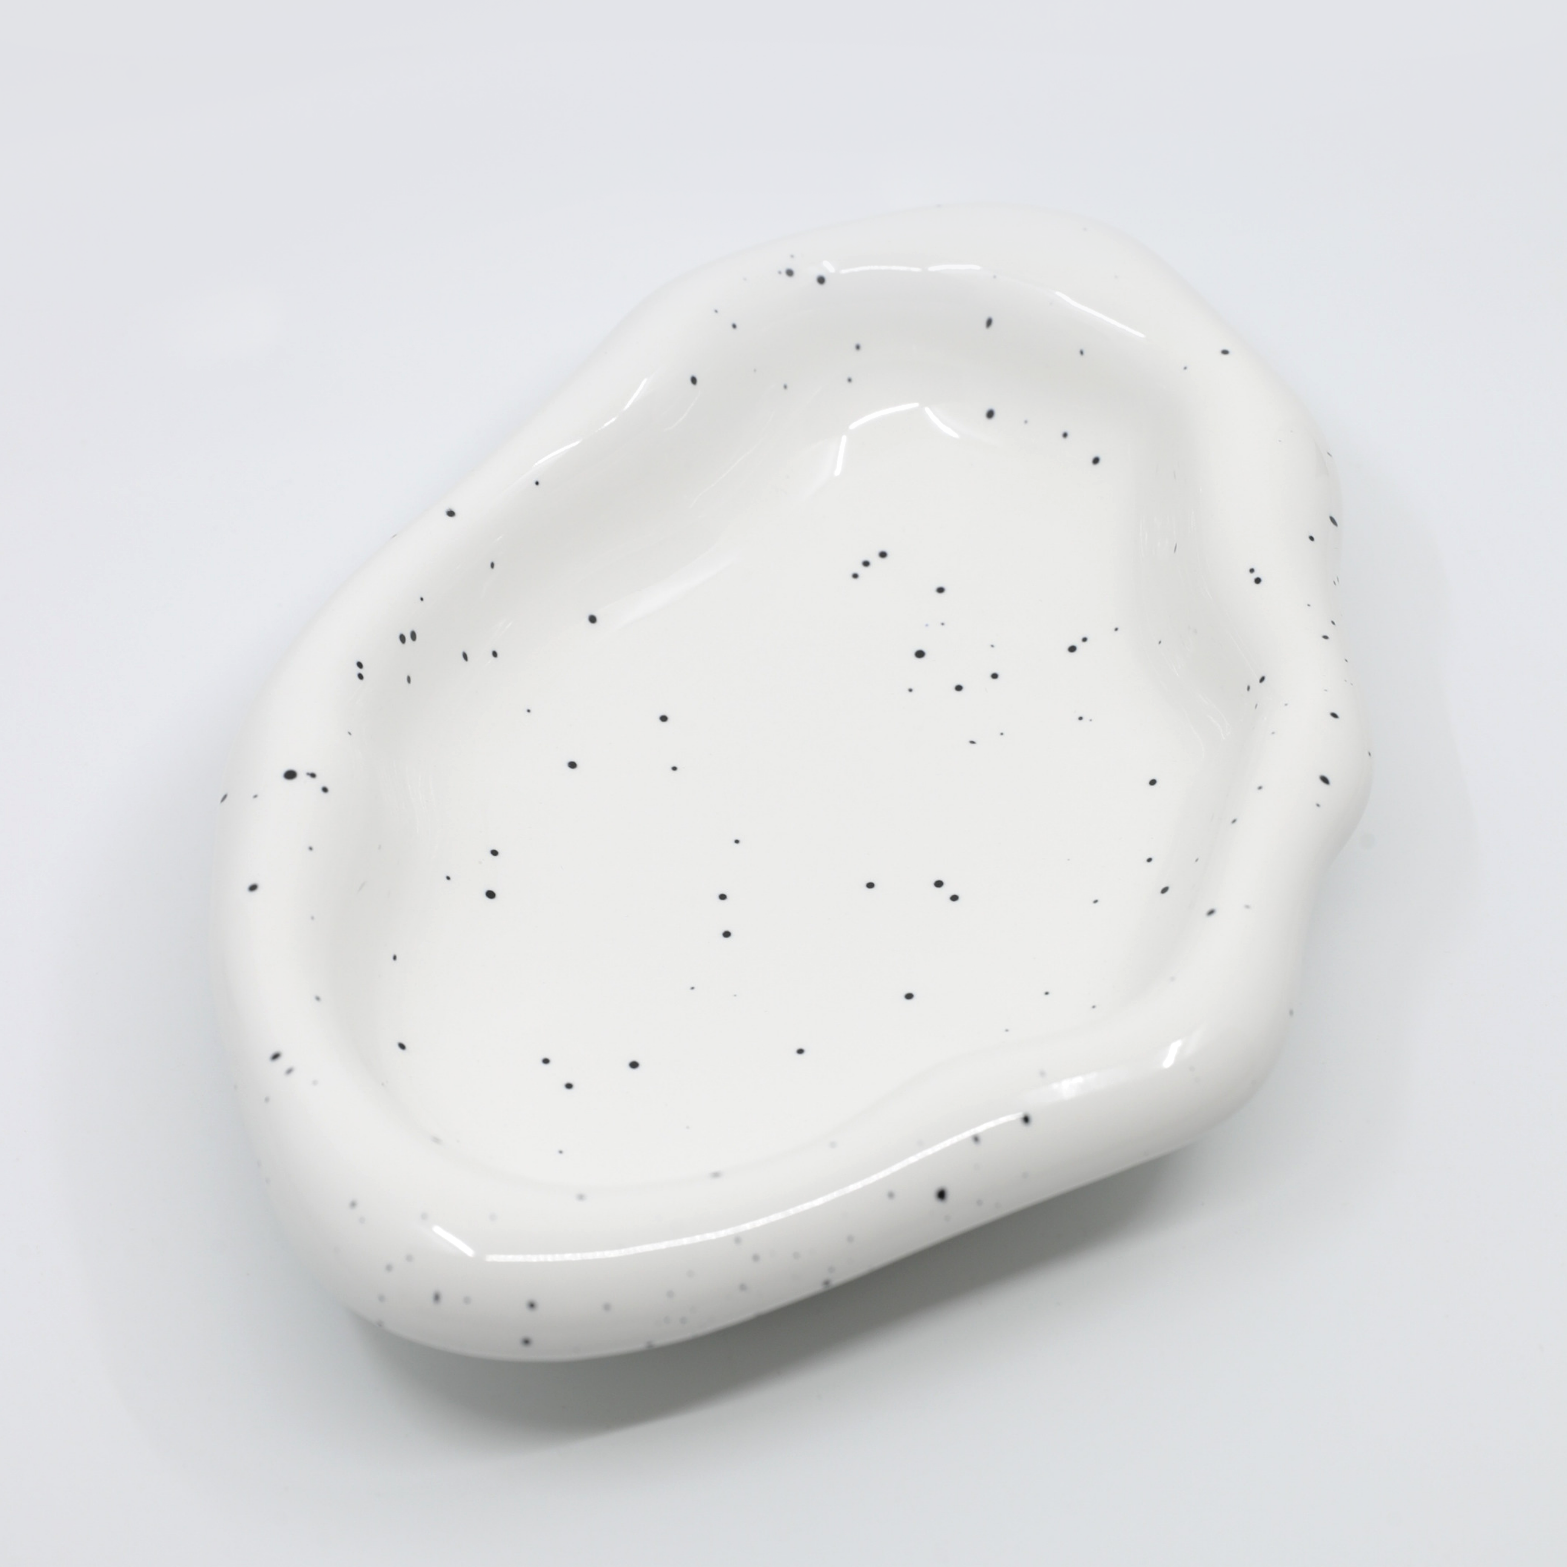 Warbled Ceramic - Small Speckled Bowl